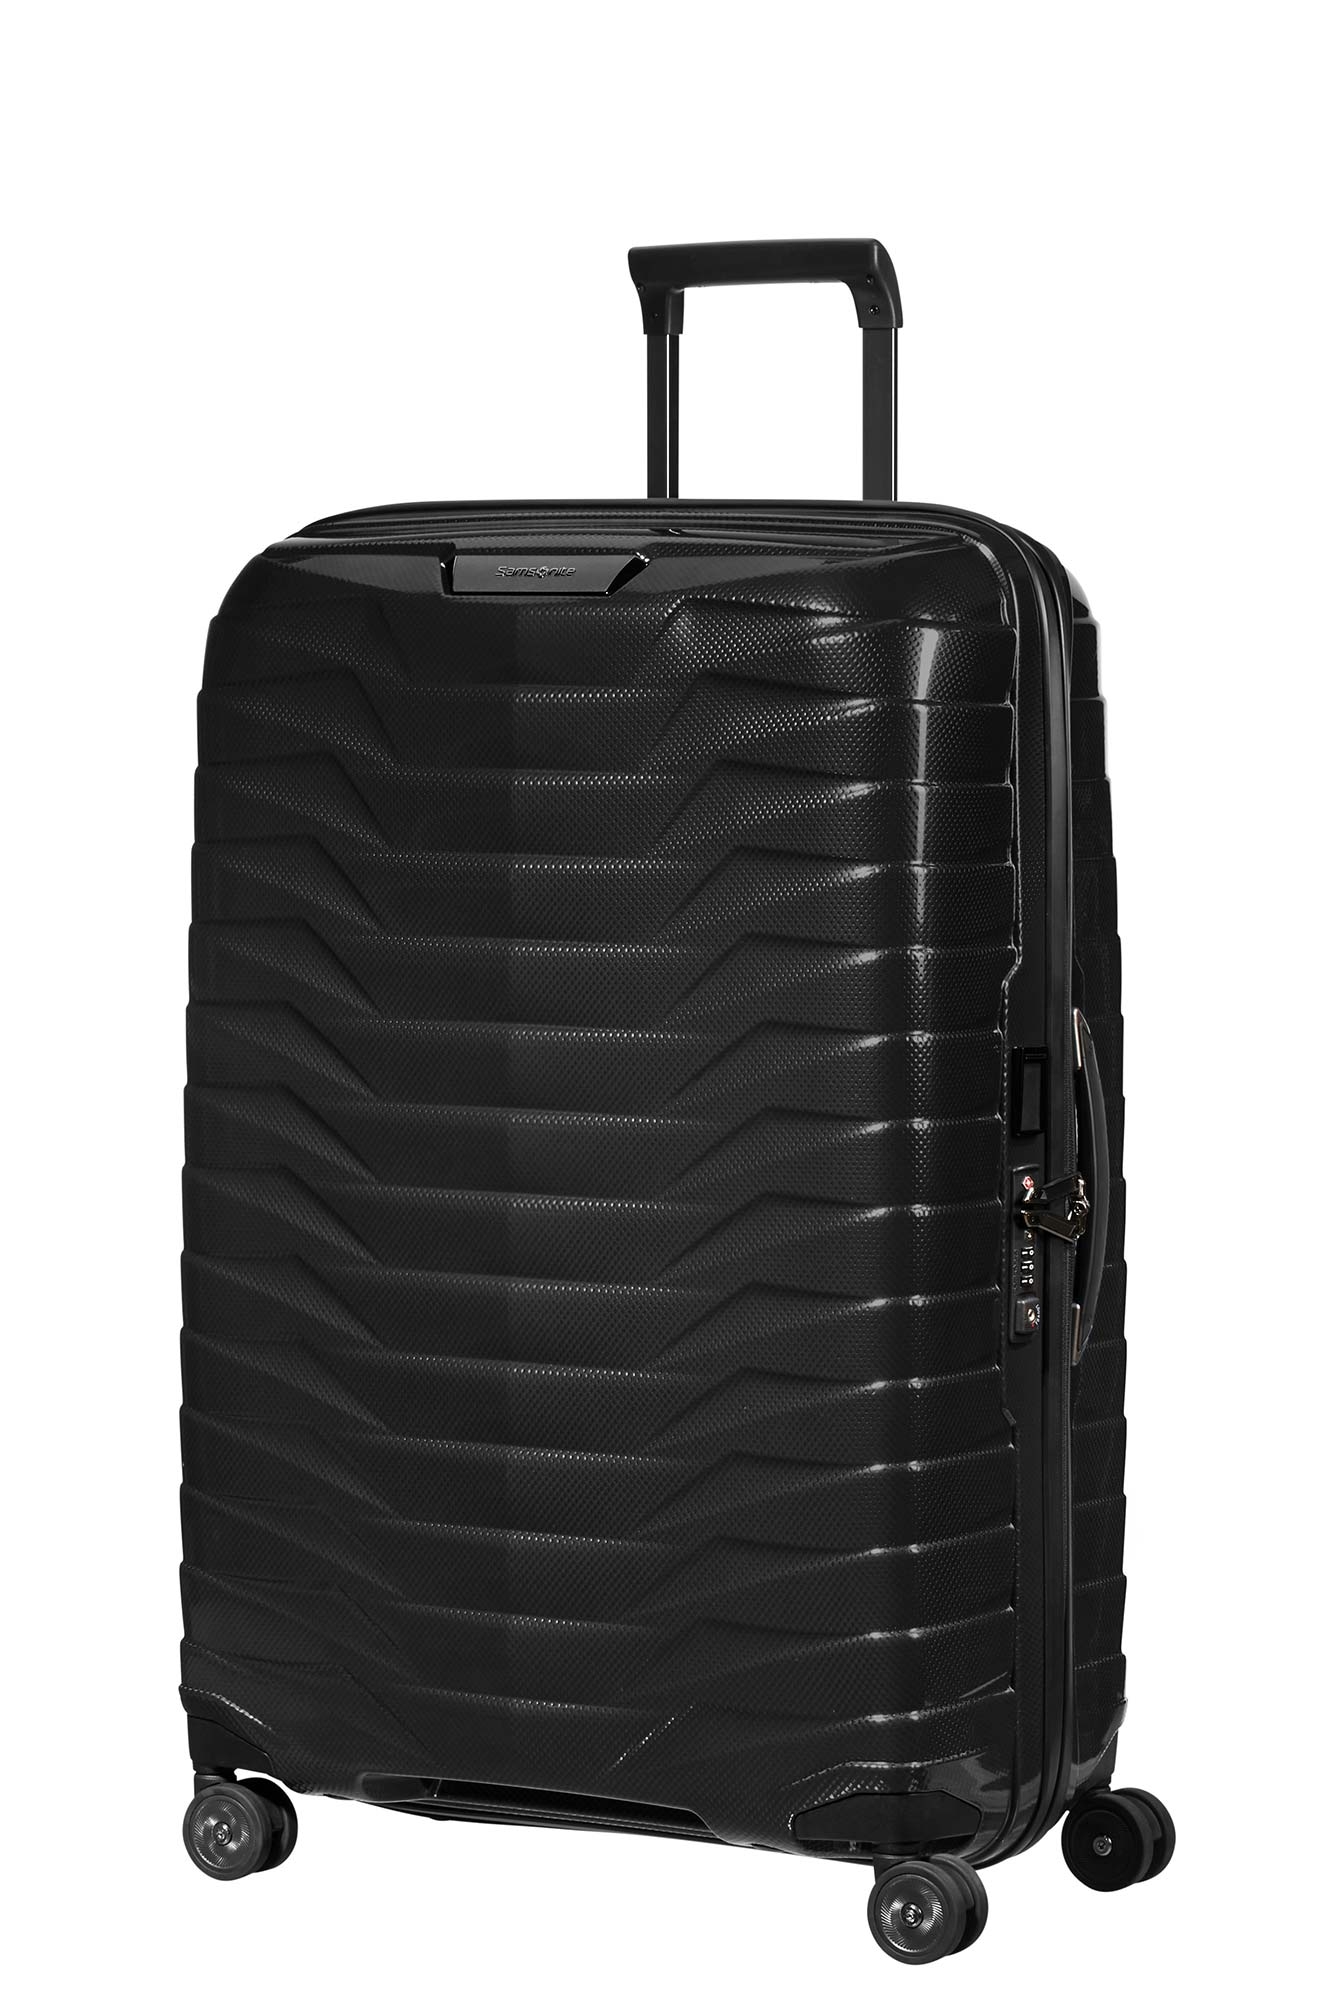 SAMSONITE PROXIS Trolley taille moyenne